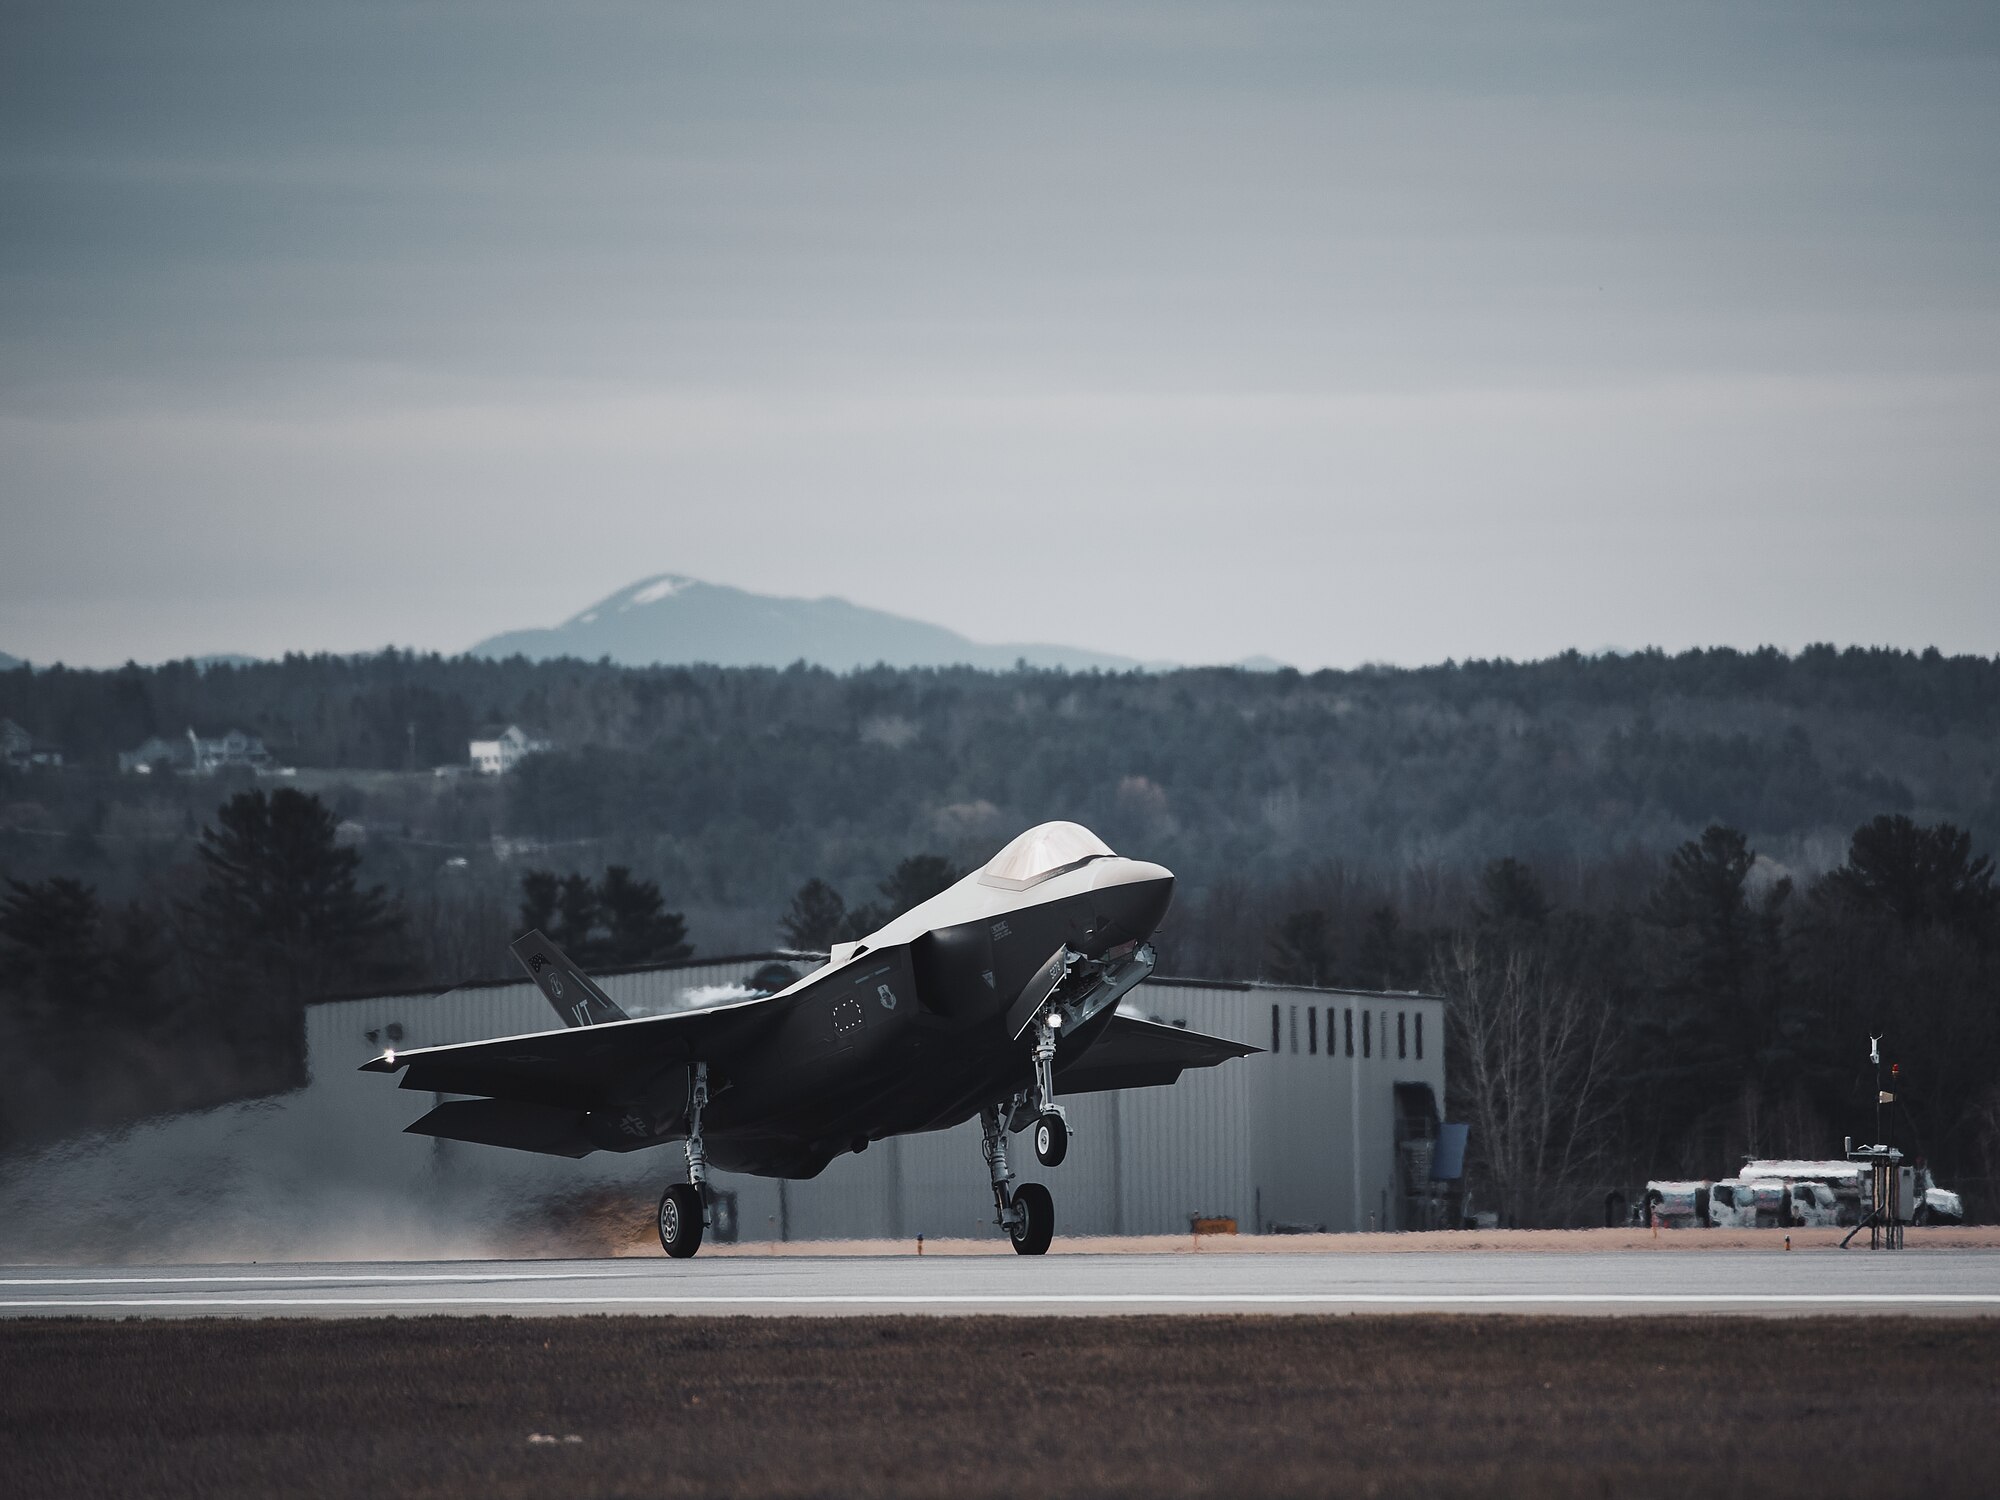 Pilots assigned to the 158th Fighter Wing, Vermont Air National Guard, takeoff for a routine training mission, Vermont Air National Guard Base